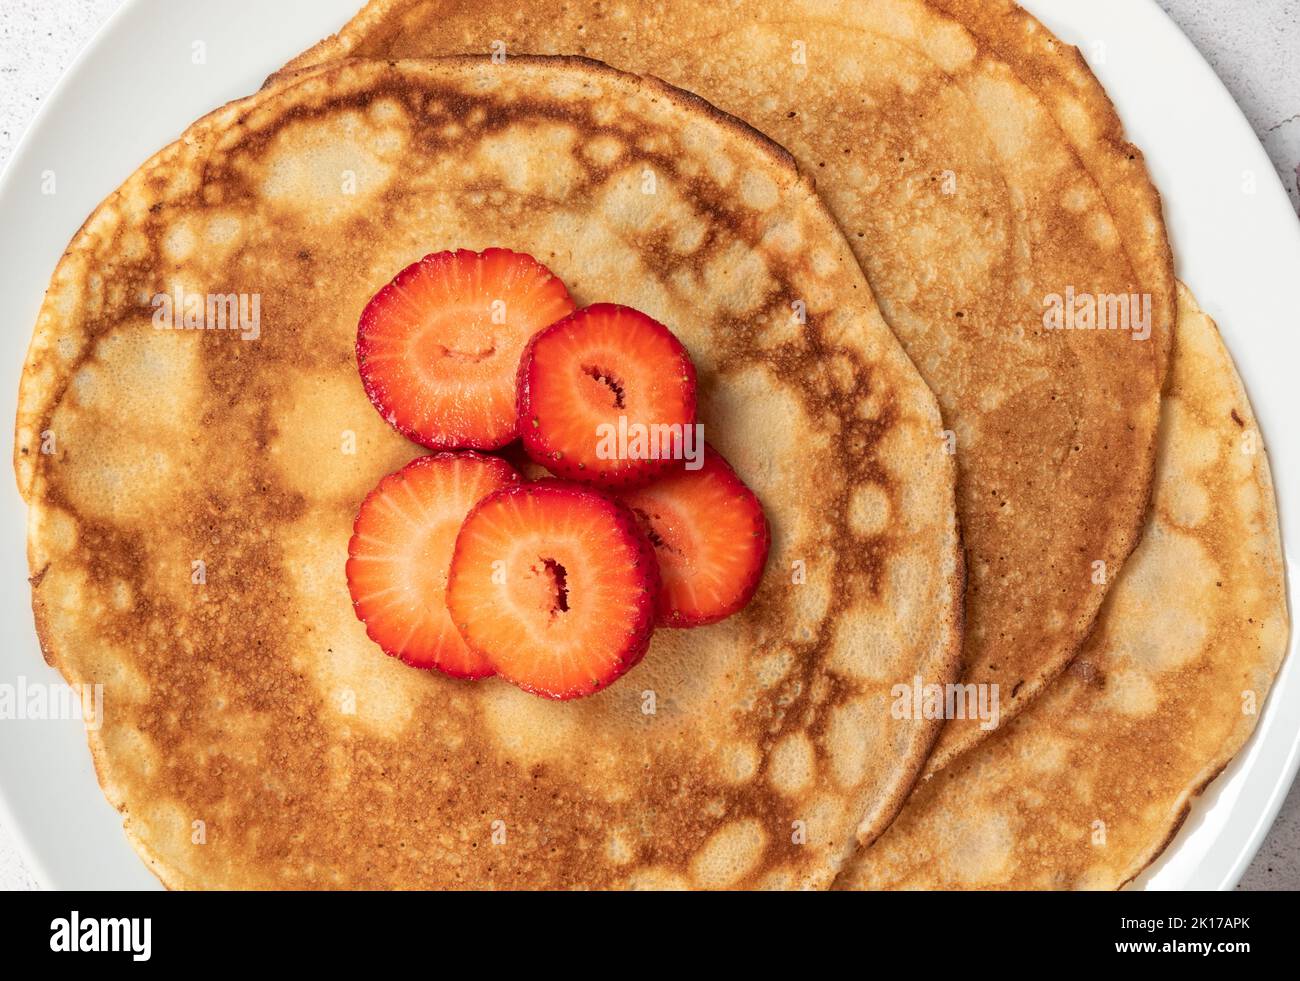 Pancakes with strawberries Stock Photo